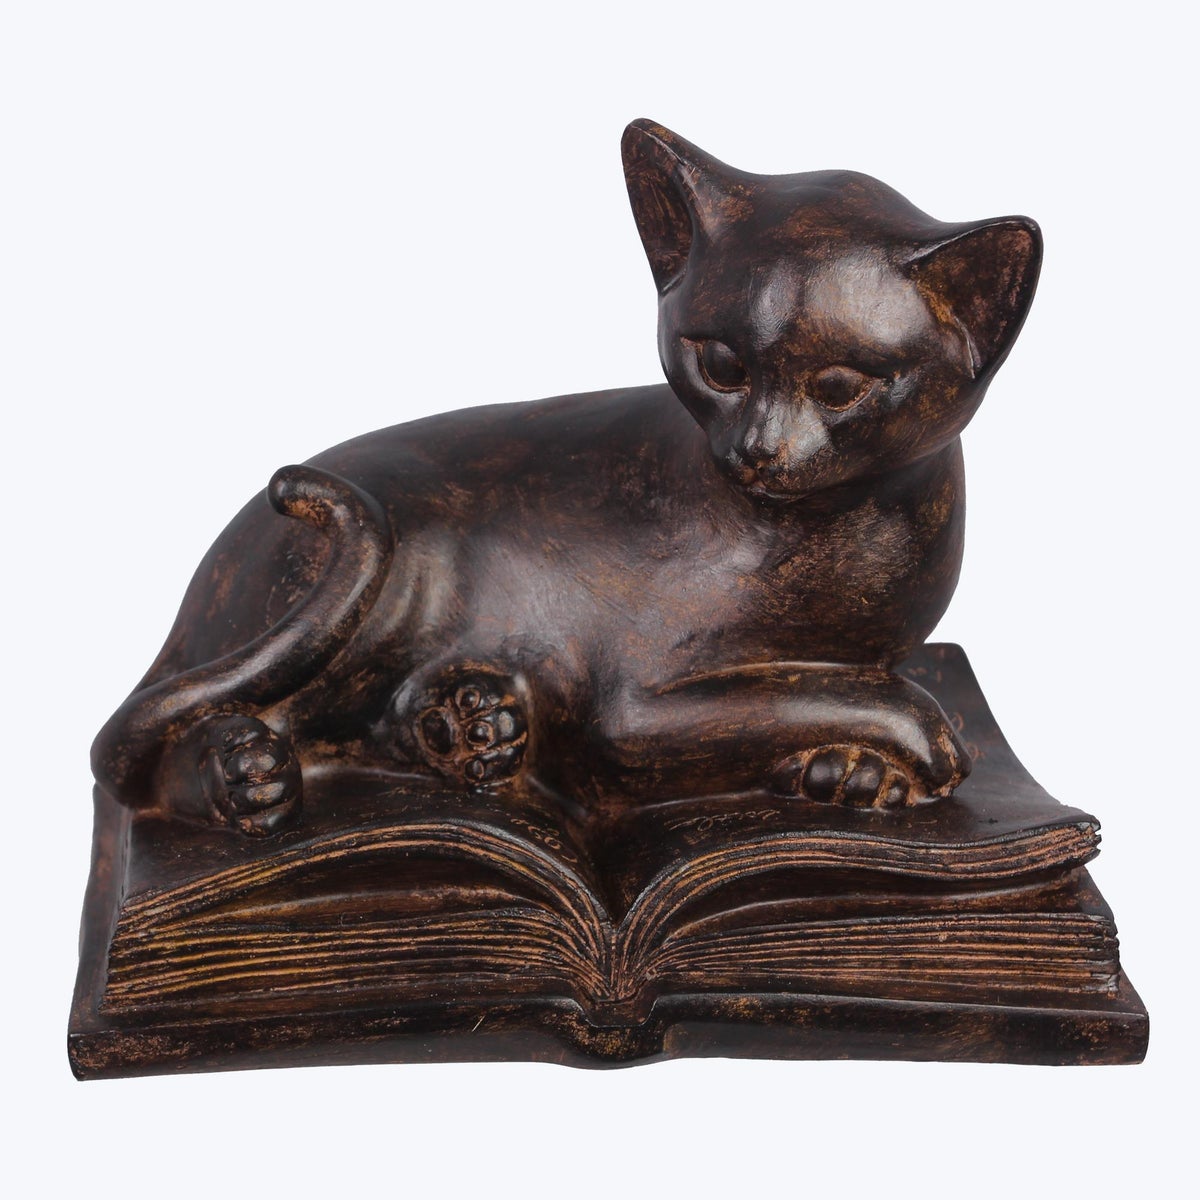 Resin Cat On Book